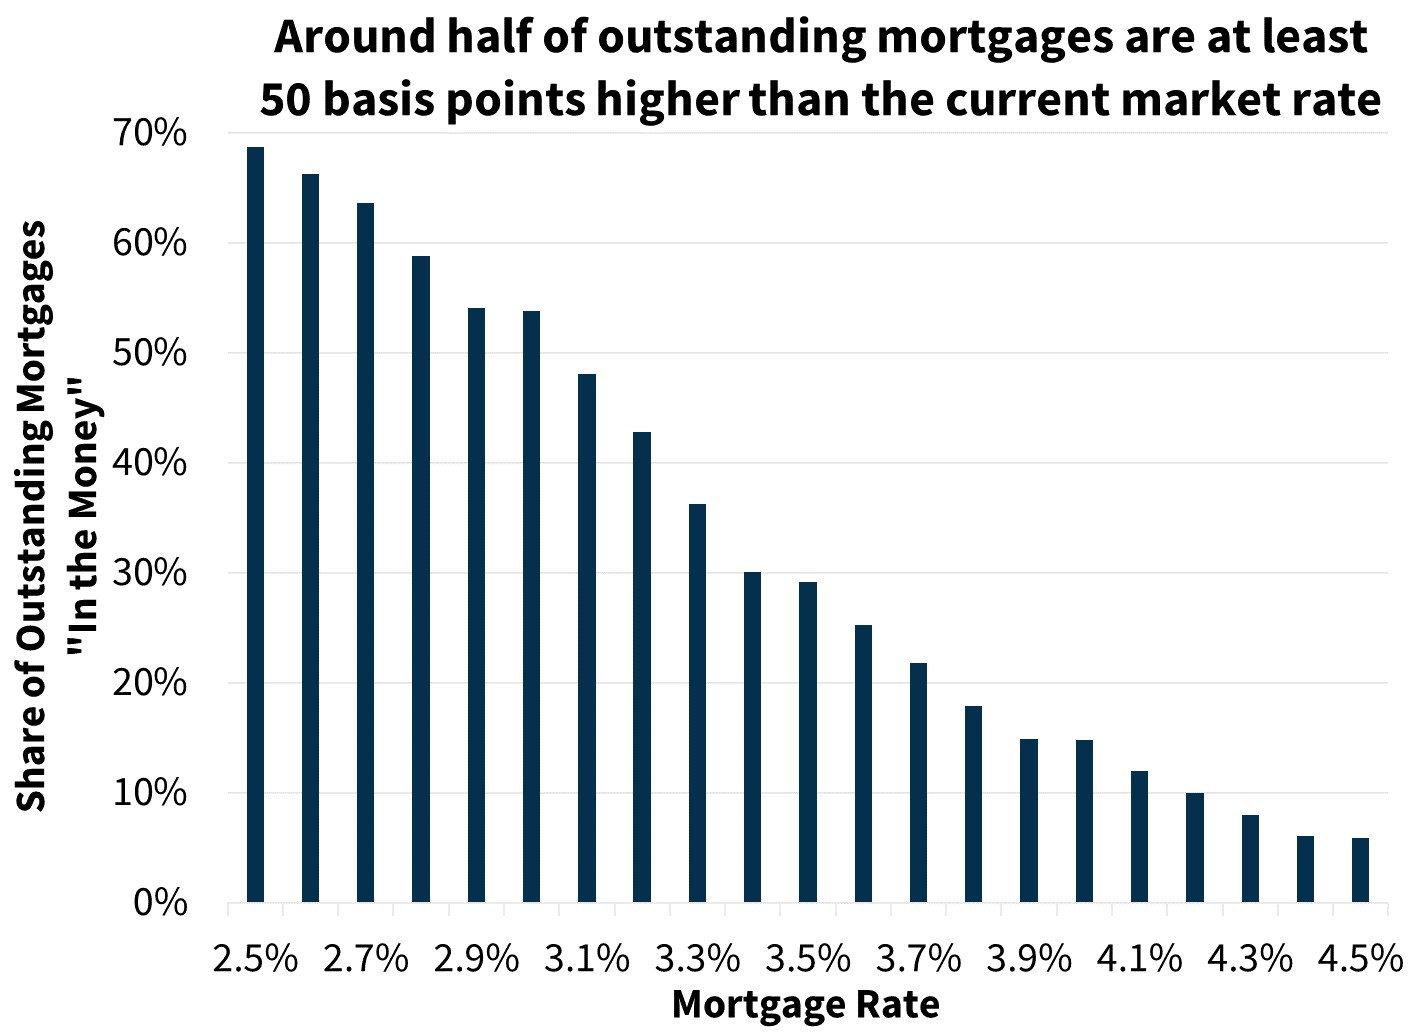  Around half of outstanding mortgages are at least 50 basis points higher than the current market rate
